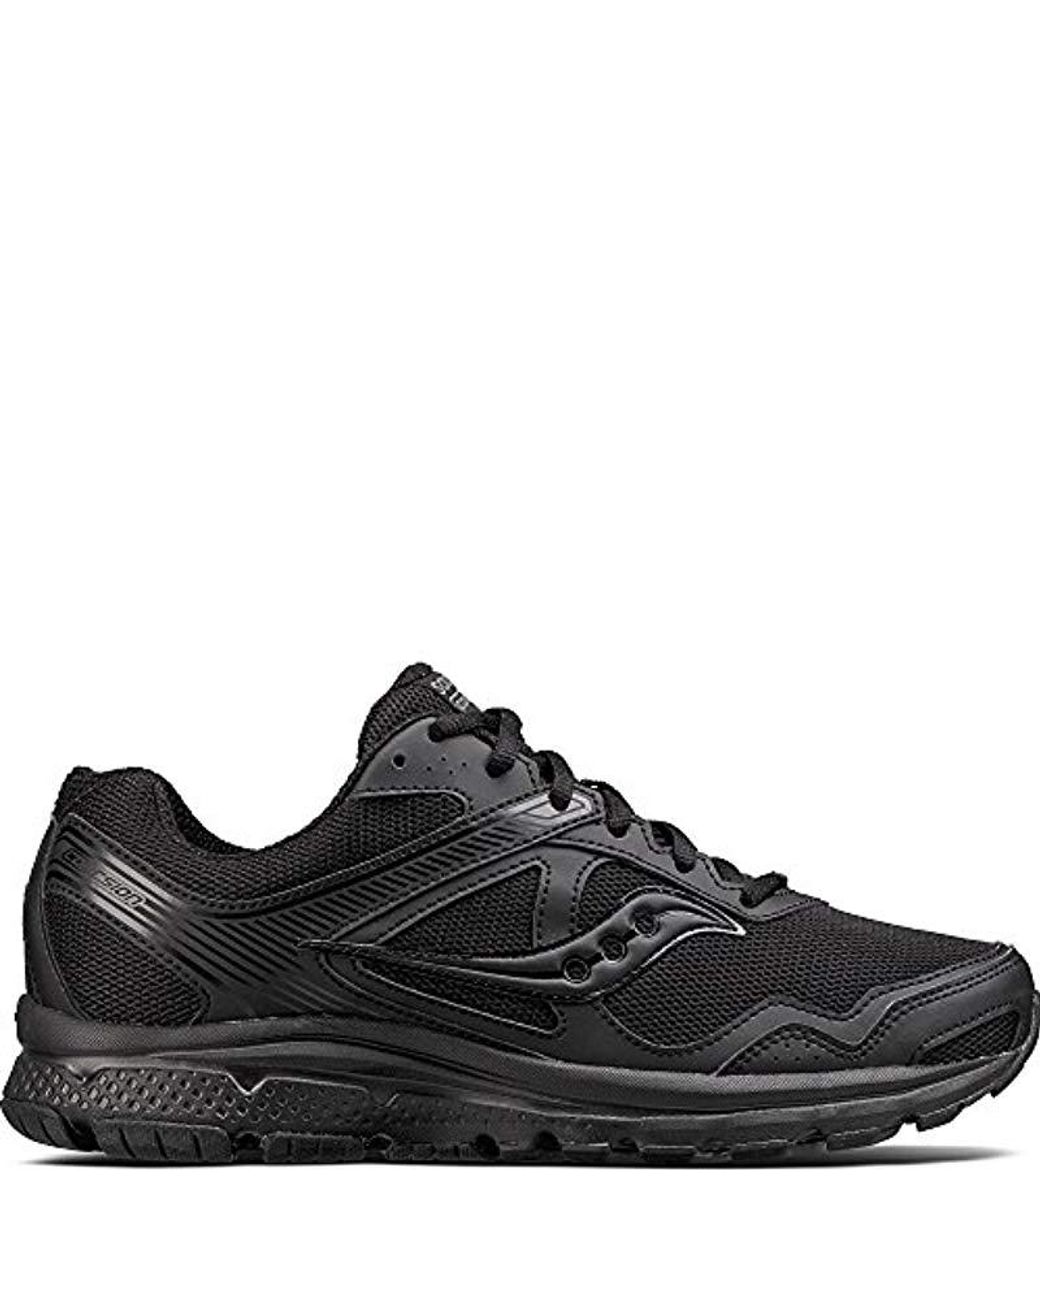 Saucony Cohesion 10 Running Shoe in Black for Men - Save 35% - Lyst